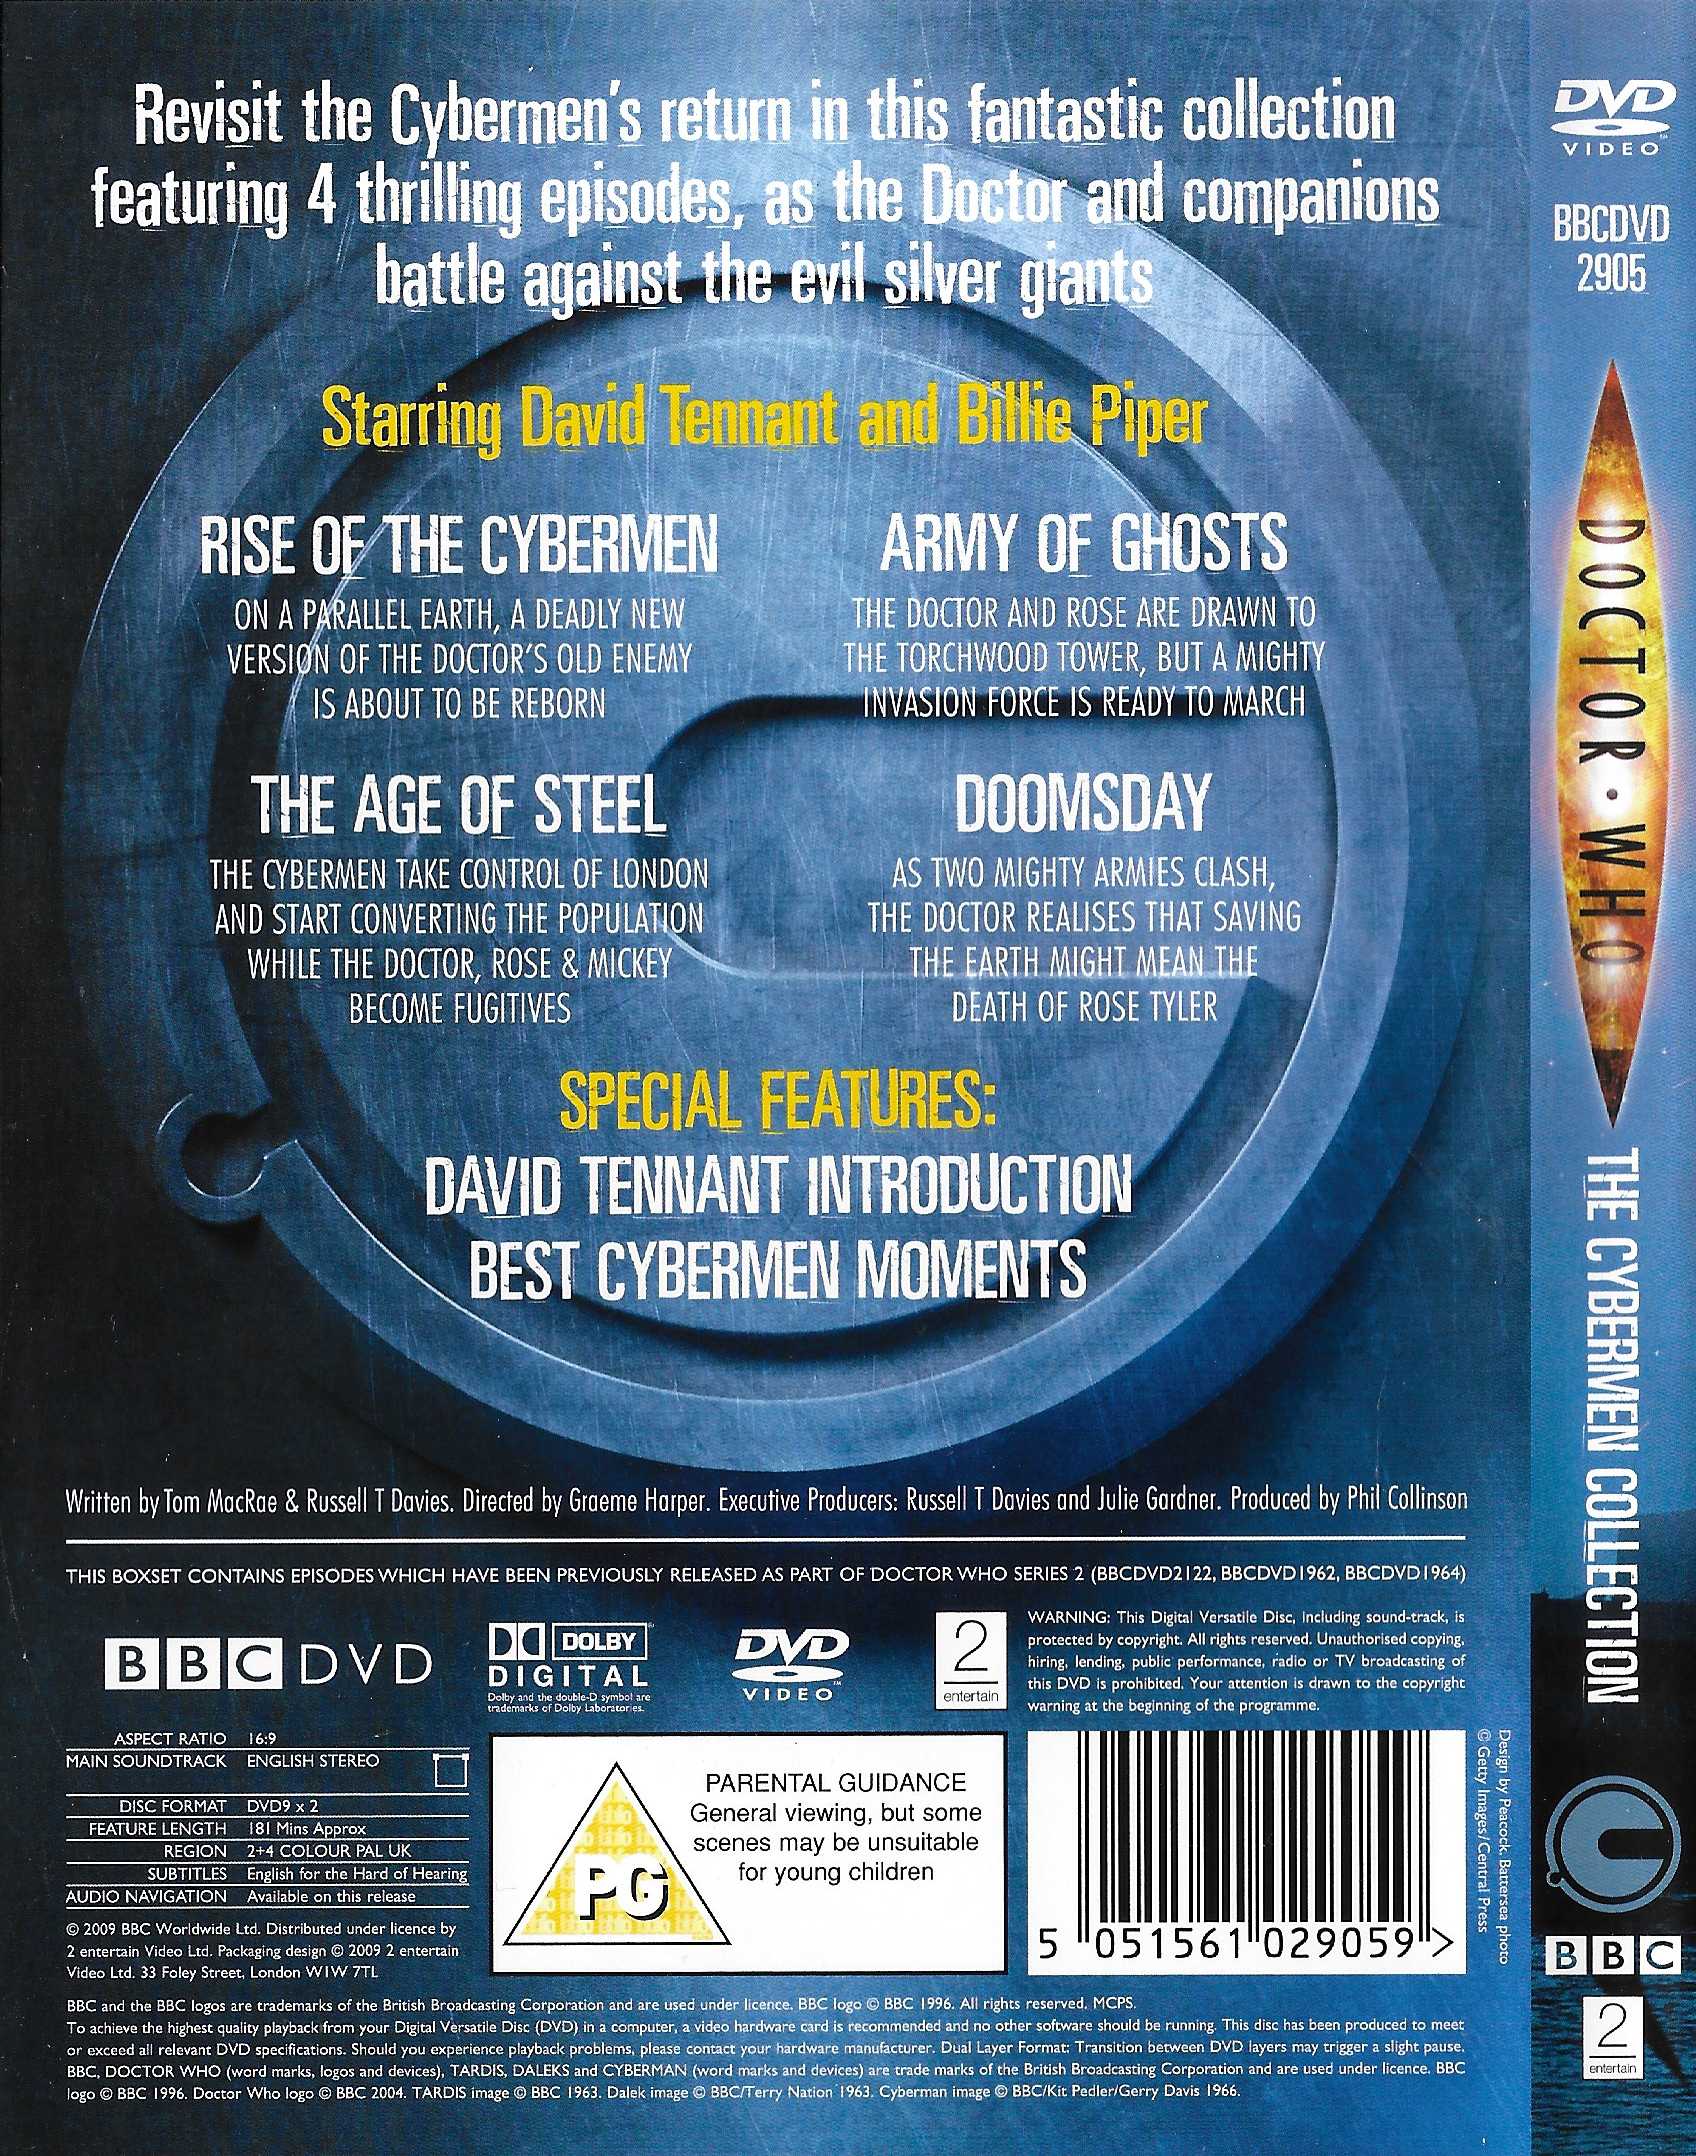 Picture of BBCDVD 2905 Doctor Who - The Cyberman collection by artist Tom MacRae / Russell T Davies from the BBC records and Tapes library